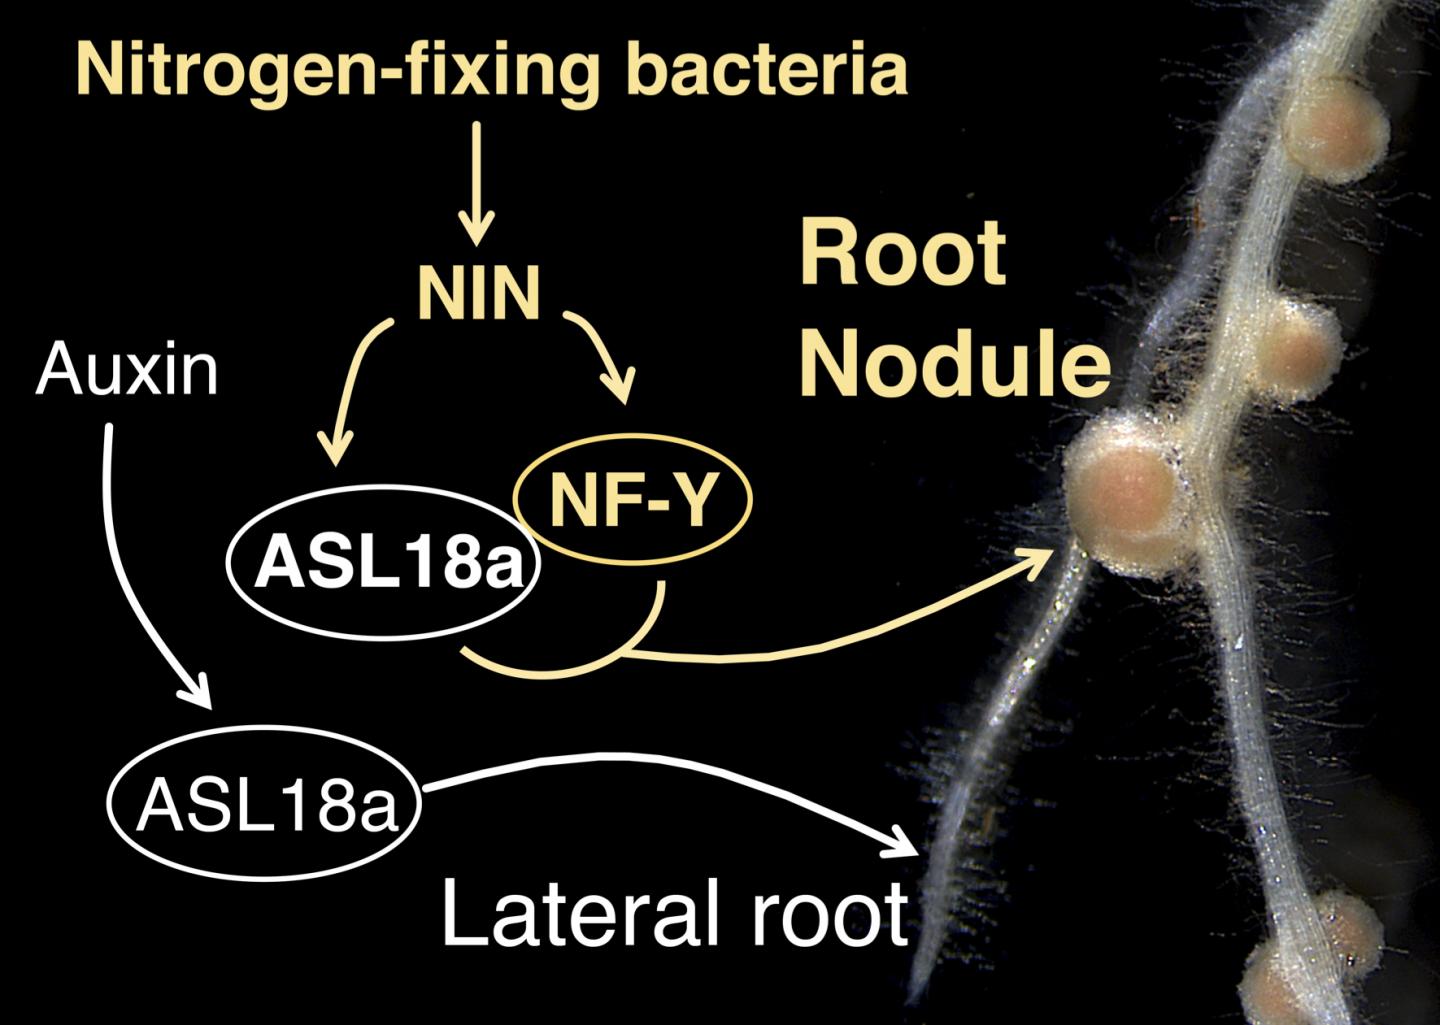 A Lateral Root and Root Nodules of Lotus Japonicus